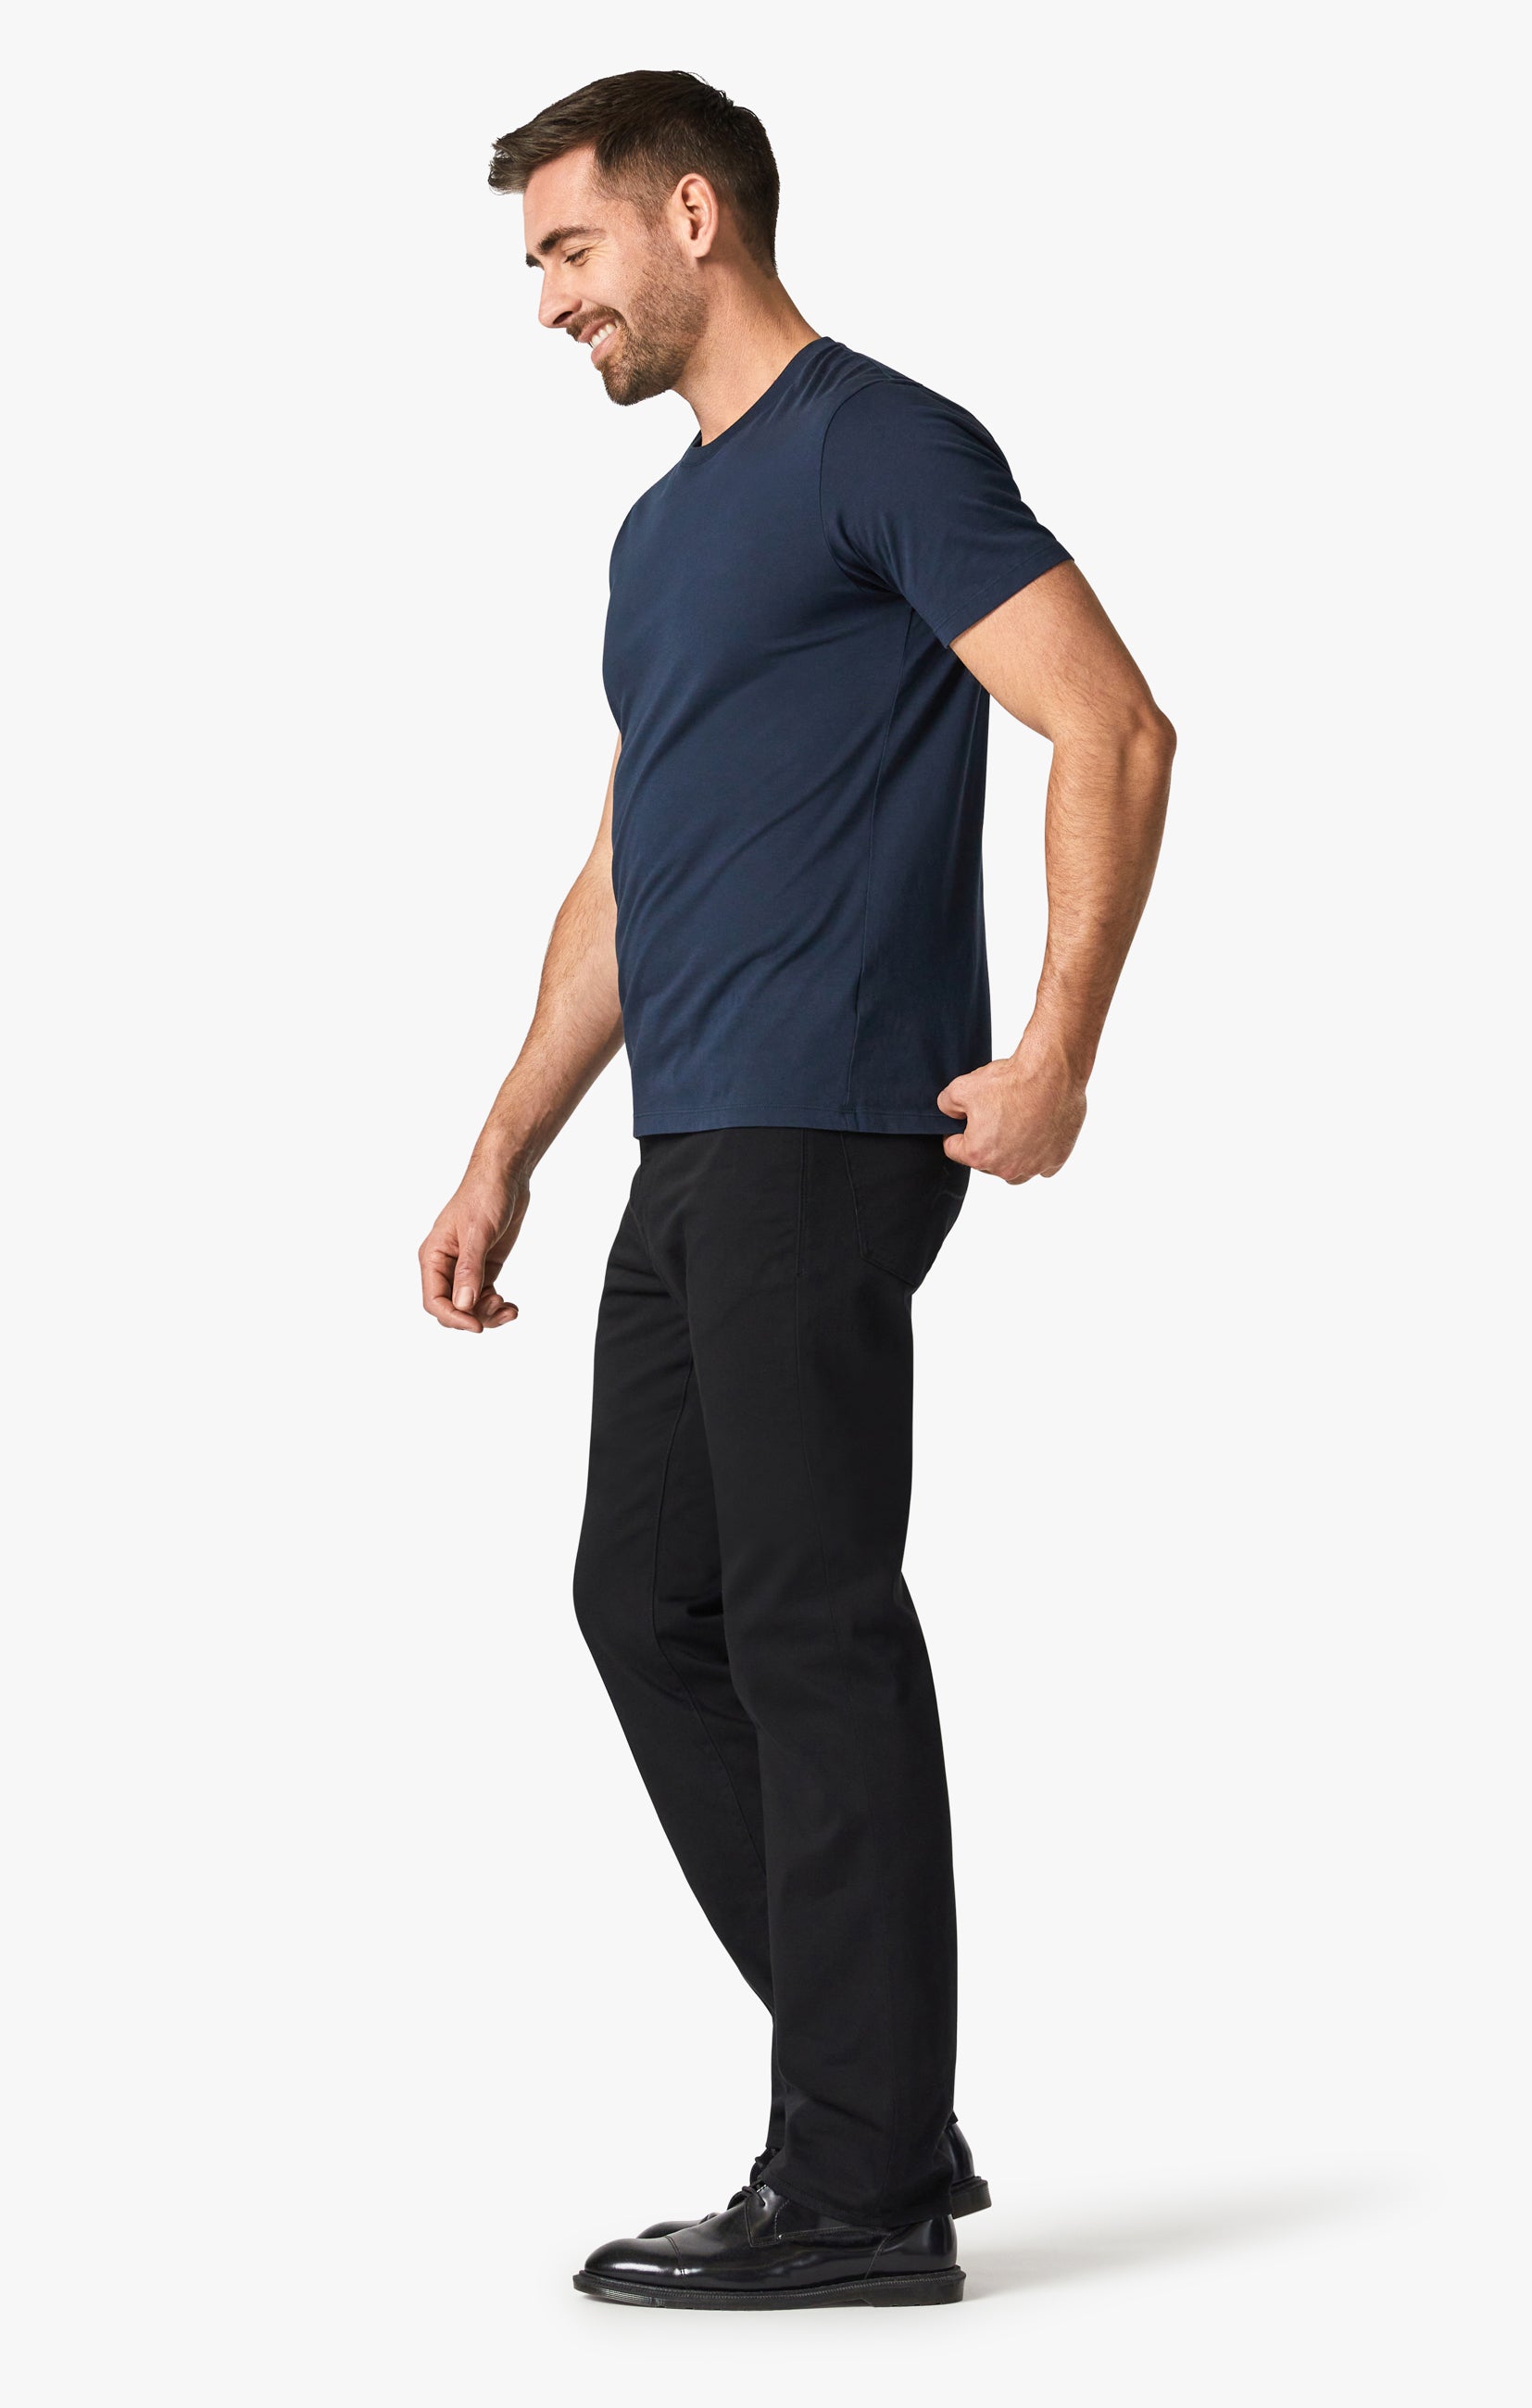 Charisma Classic Fit Jeans in Select Double Black Image 5